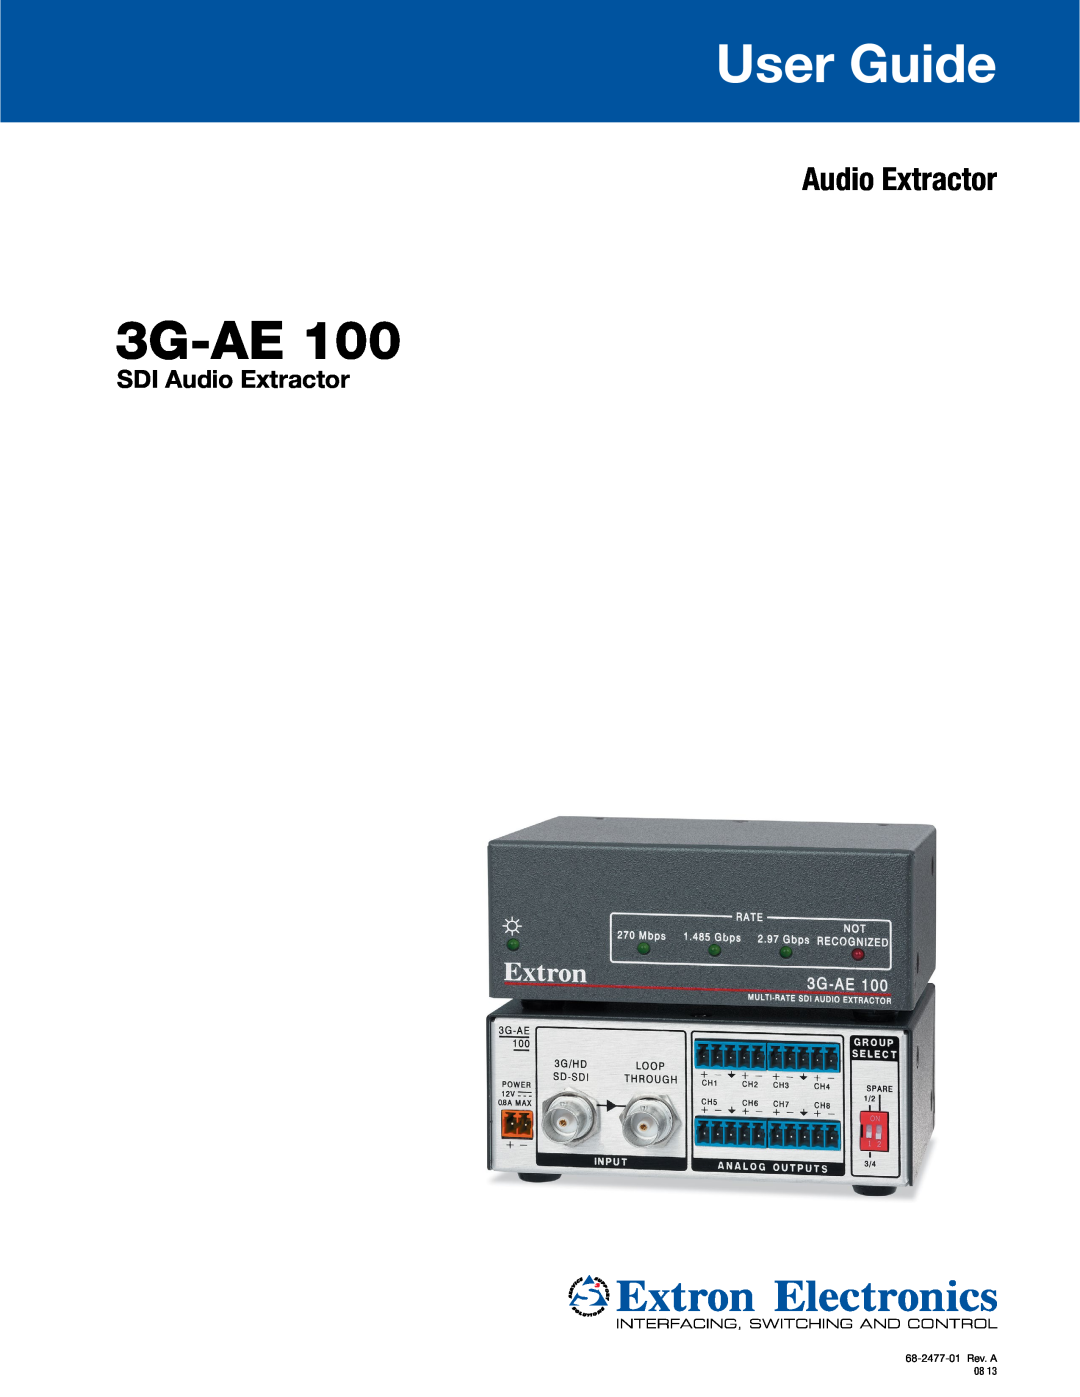 Extron electronic 3G-AE 100 manual 3G-AE100, User Guide, SDI Audio Extractor, 68-2477-01Rev. A 